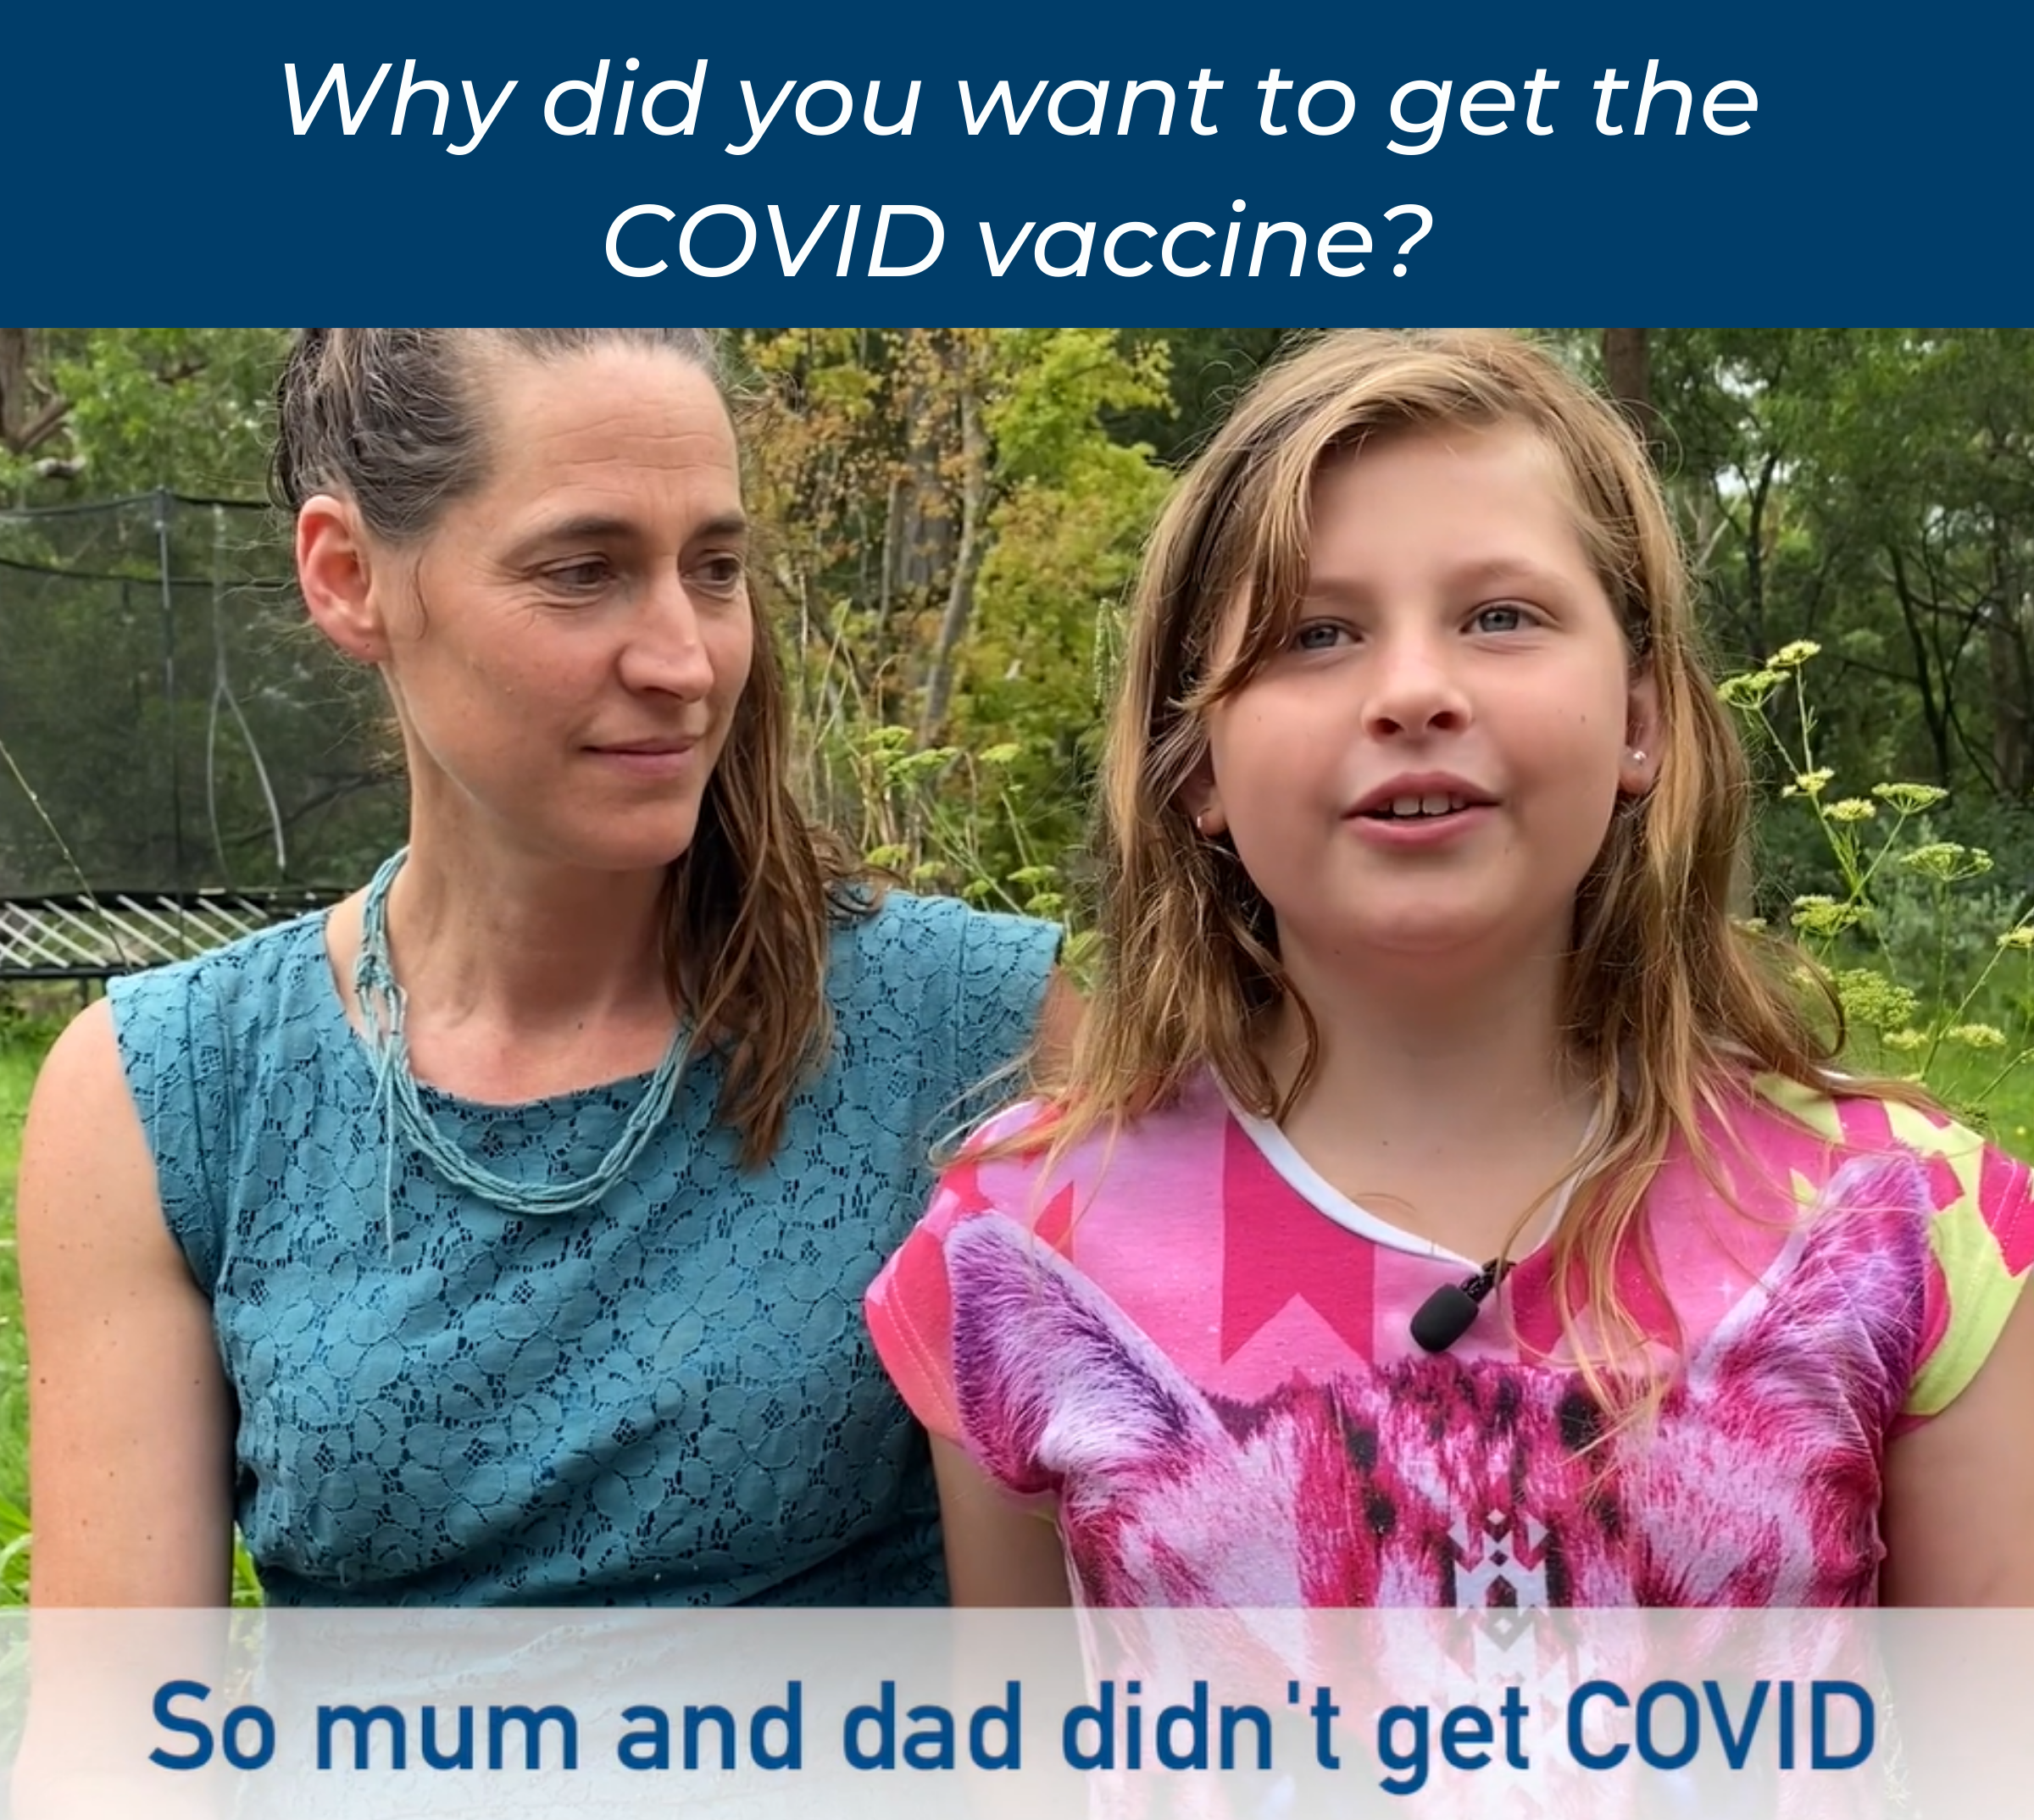 Annie and Harry's paediatric COVID vaccination story